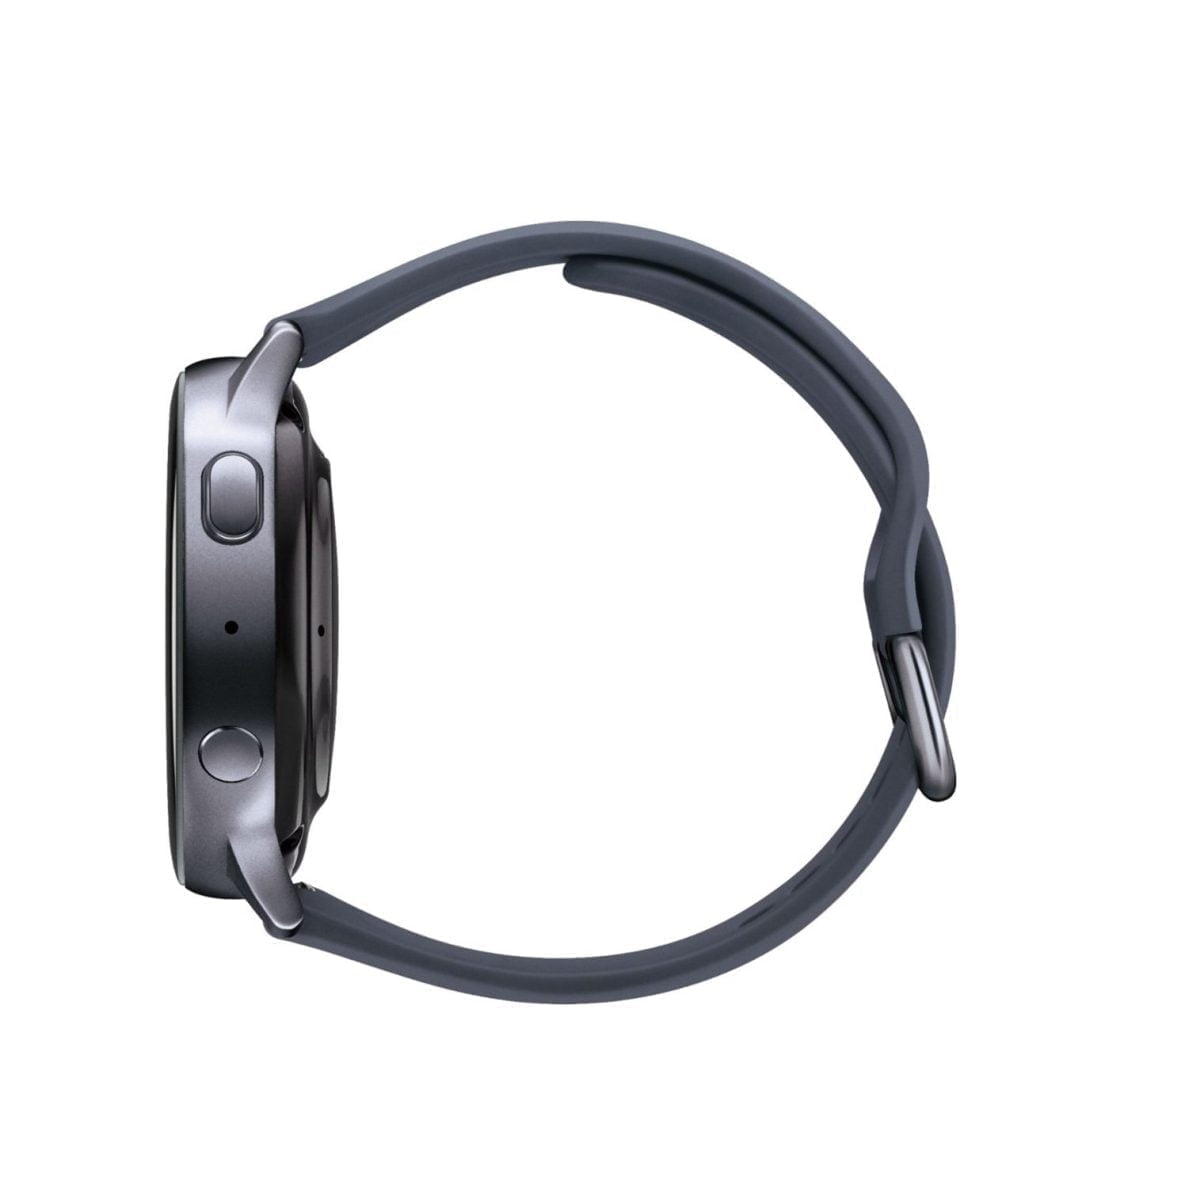 6360438Cv17D Samsung &Lt;H1 Class=&Quot;Heading-5 V-Fw-Regular&Quot;&Gt;Samsung - Galaxy Watch Active2 Smartwatch 44Mm Aluminum - Aqua Black &Lt;Strong&Gt;Model&Lt;/Strong&Gt;:&Lt;Span Class=&Quot;Product-Data-Value Body-Copy&Quot; Style=&Quot;Color: #333333; Font-Size: 16Px;&Quot;&Gt;Sm-R820Nzkaxar&Lt;/Span&Gt;&Lt;/H1&Gt; Https://Www.youtube.com/Watch?V=Cu0-Lhyhgu4 &Lt;Div Class=&Quot;Long-Description-Container Body-Copy &Quot;&Gt; &Lt;Div Class=&Quot;Html-Fragment&Quot;&Gt; &Lt;Div&Gt; &Lt;Div&Gt;Enhance Your Sporting Performance With This Samsung Galaxy Watch Active2 Bluetooth Smartwatch. Monitor Your Workouts And Receive Detailed Reports On Your Performance Even As The Running Coach Feature Gives You Important Insight In Real-Time. This Samsung Galaxy Watch Active2 Bluetooth Smartwatch Analyses Your Sleep Pattern And Offers Helpful Advice On How To Improve It.&Lt;/Div&Gt; &Lt;/Div&Gt; &Lt;/Div&Gt; &Lt;/Div&Gt;  Samsung Galaxy Watch Active2 Samsung Galaxy Watch Active2 Smartwatch 44Mm Aluminum - Aqua Black